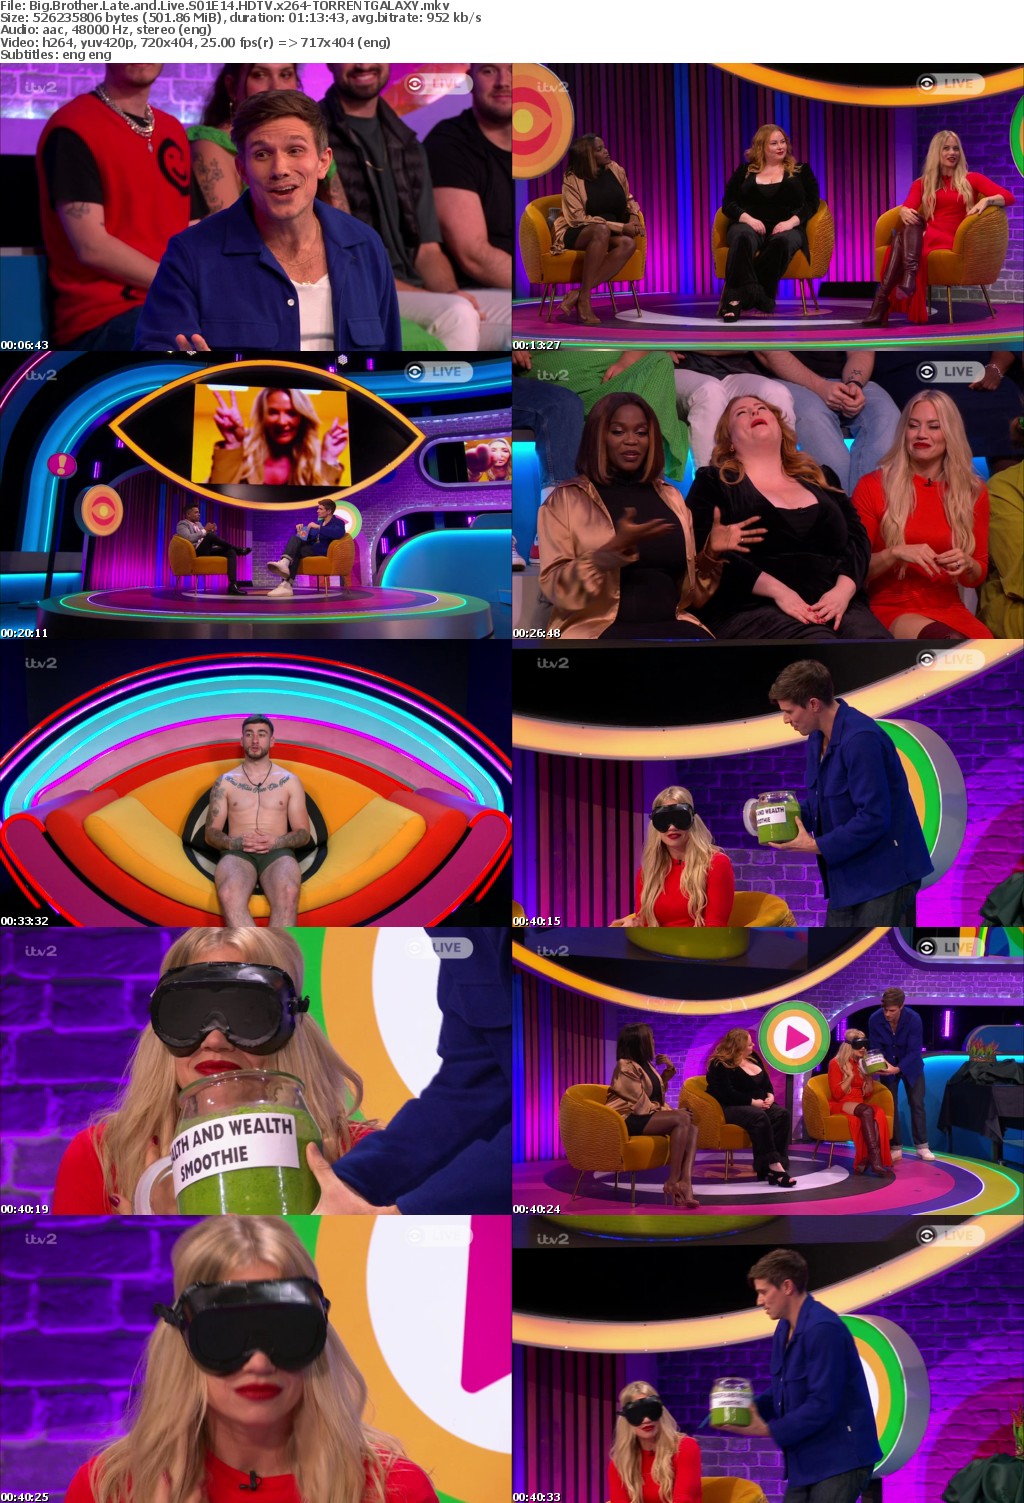 Big Brother Late and Live S01E14 HDTV x264-GALAXY